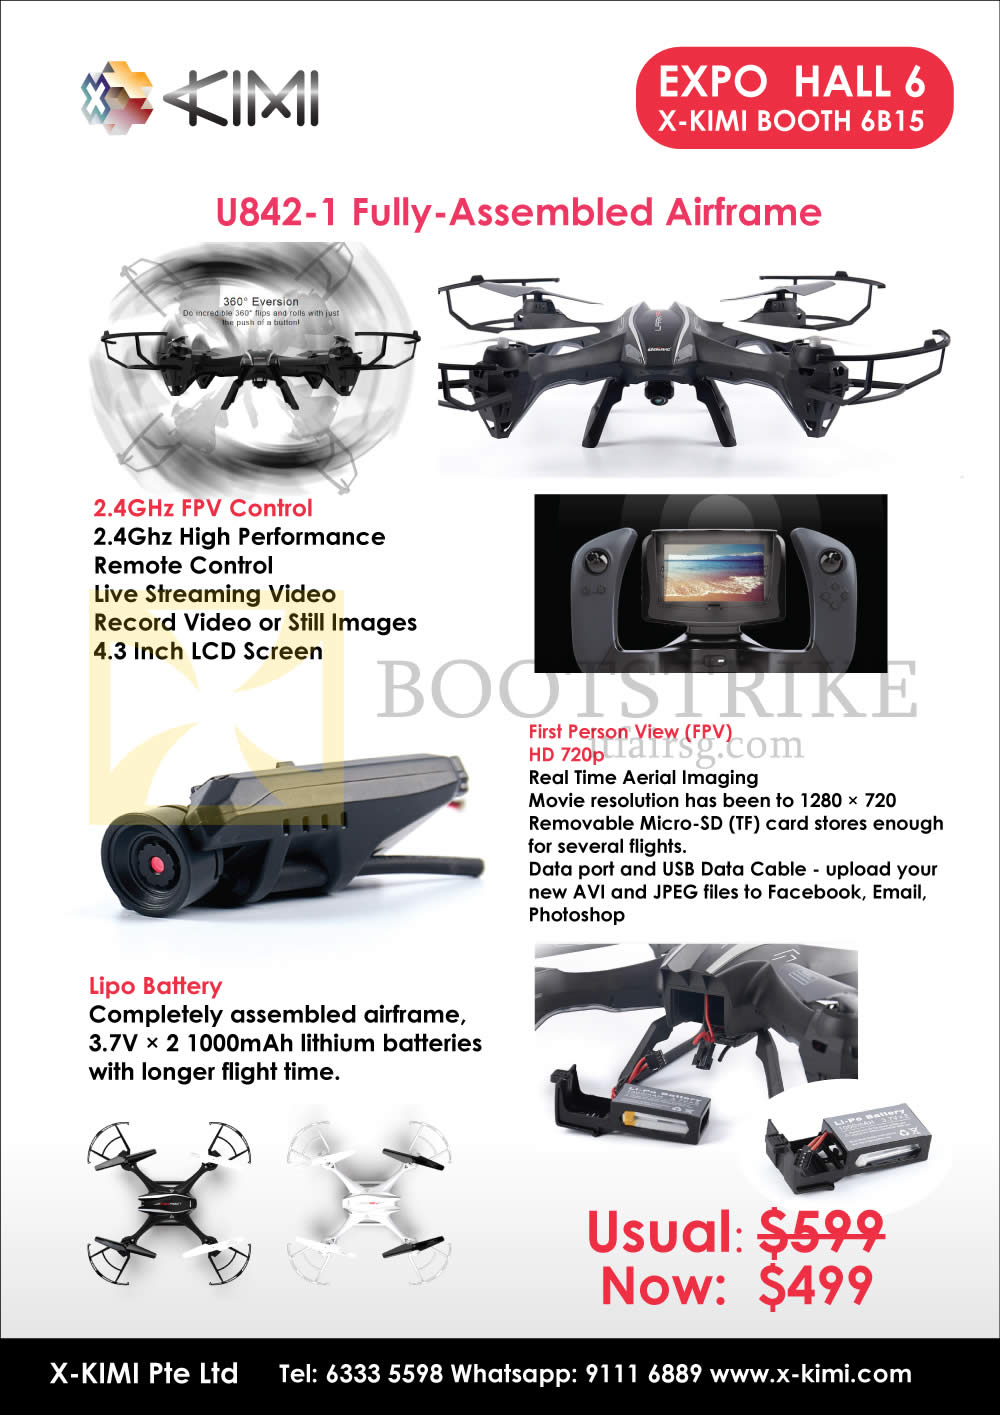 SITEX 2015 price list image brochure of X-Kimi U842-1 Fully Assembled Airframe 2.4Ghz FPV Control, First Person View, Lipo Battery